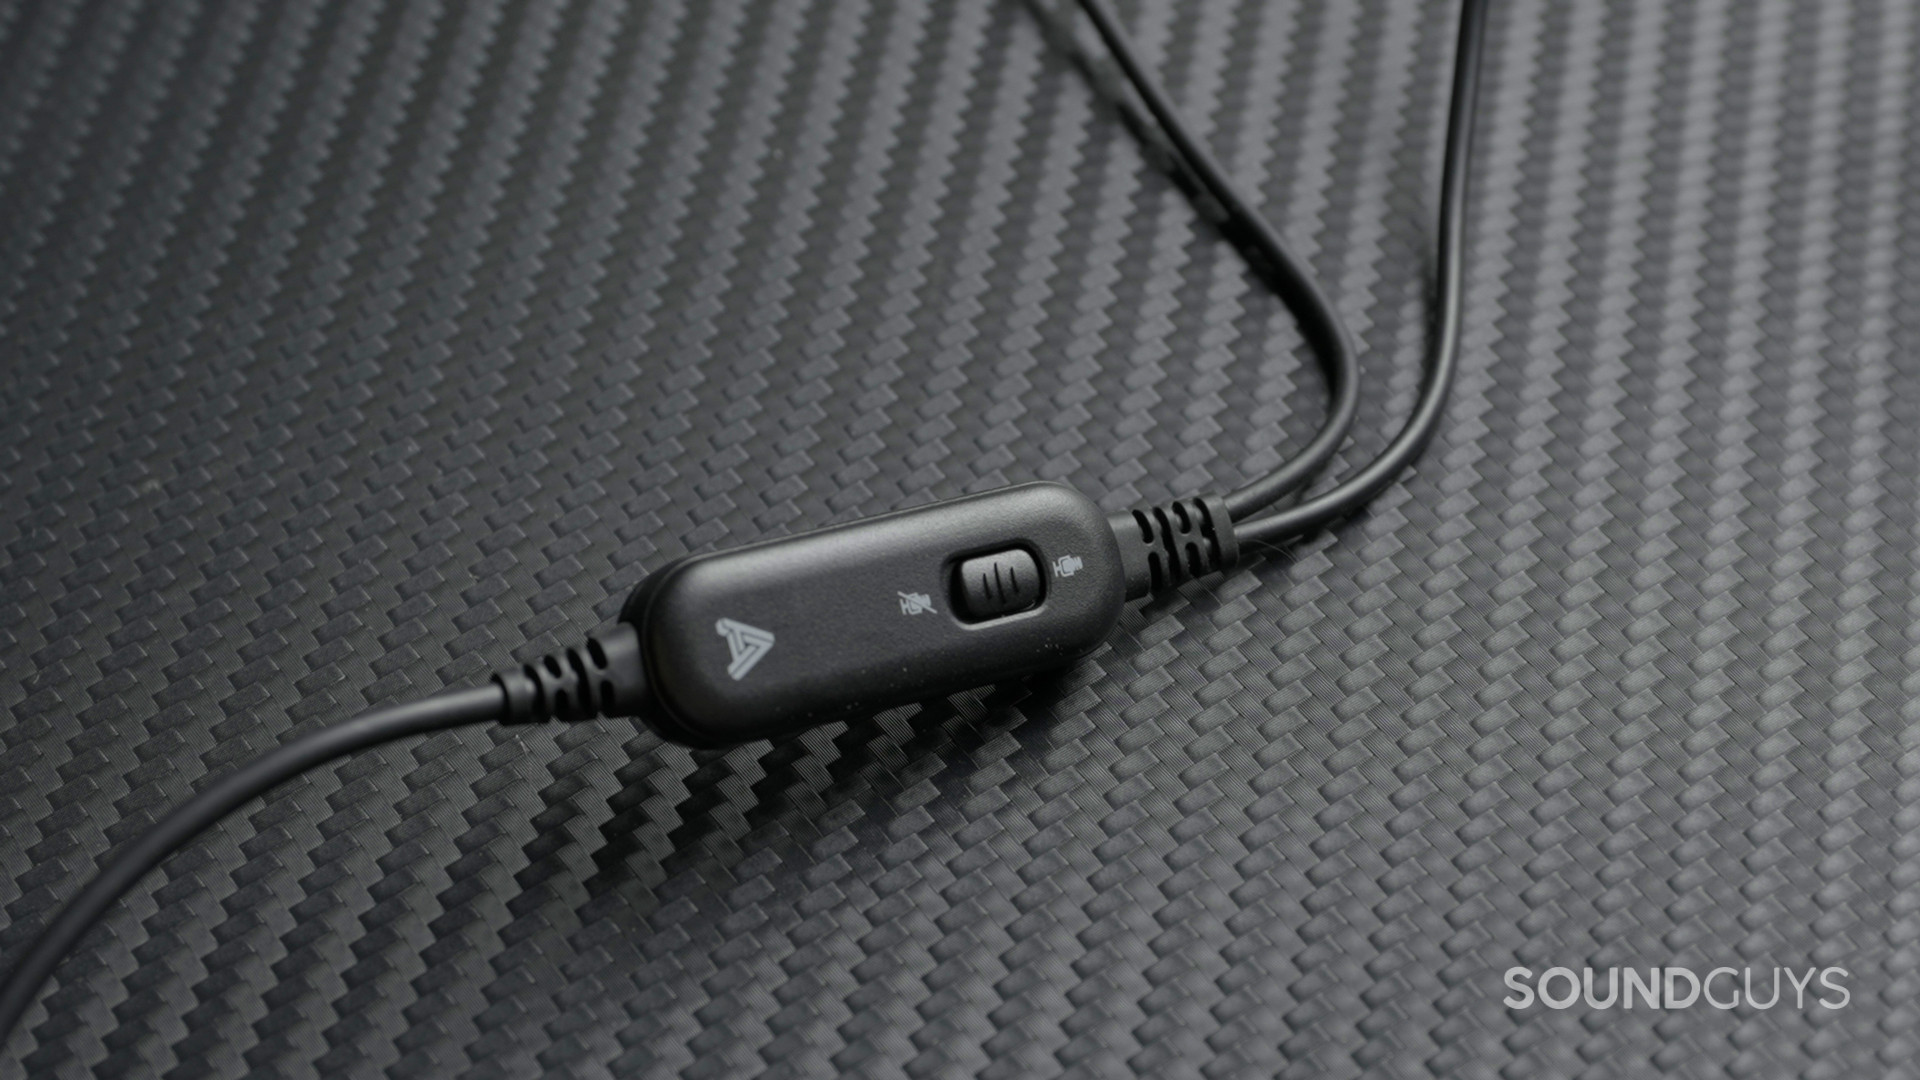 The Audeze LCD-GX has a physical mute switch on the cable.